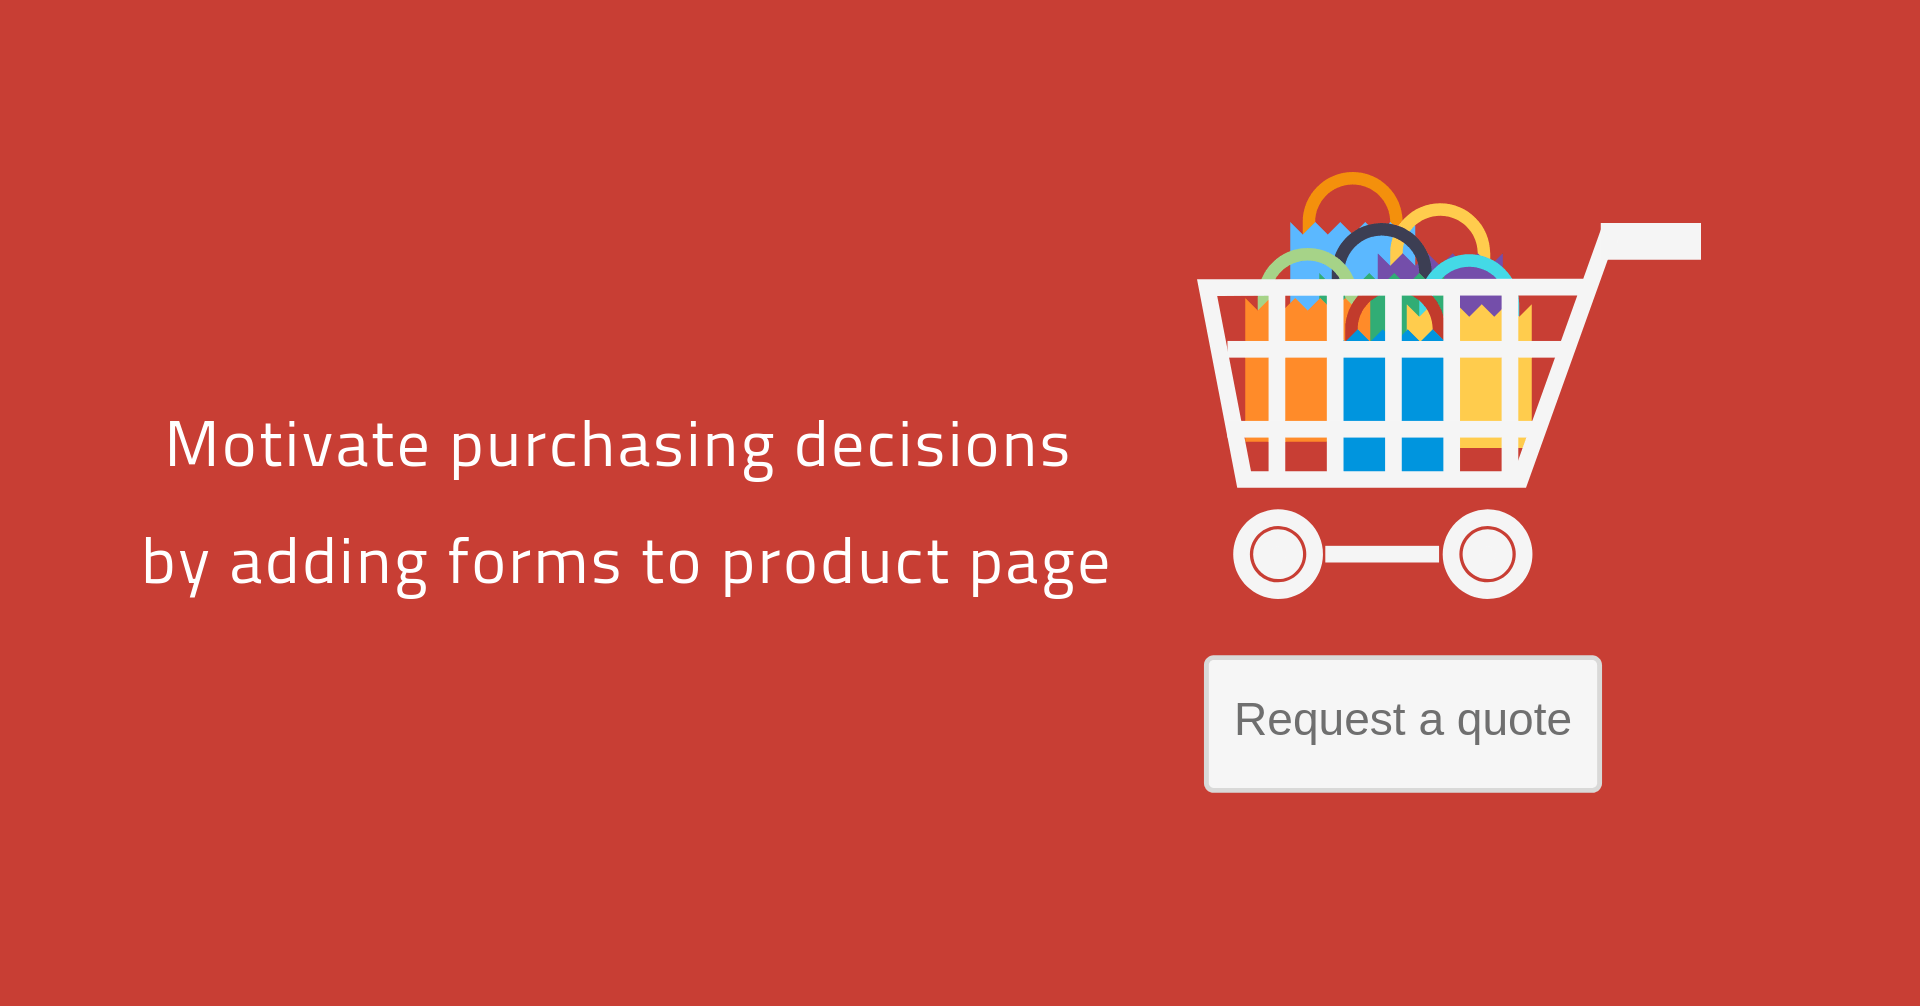 Add forms to product page